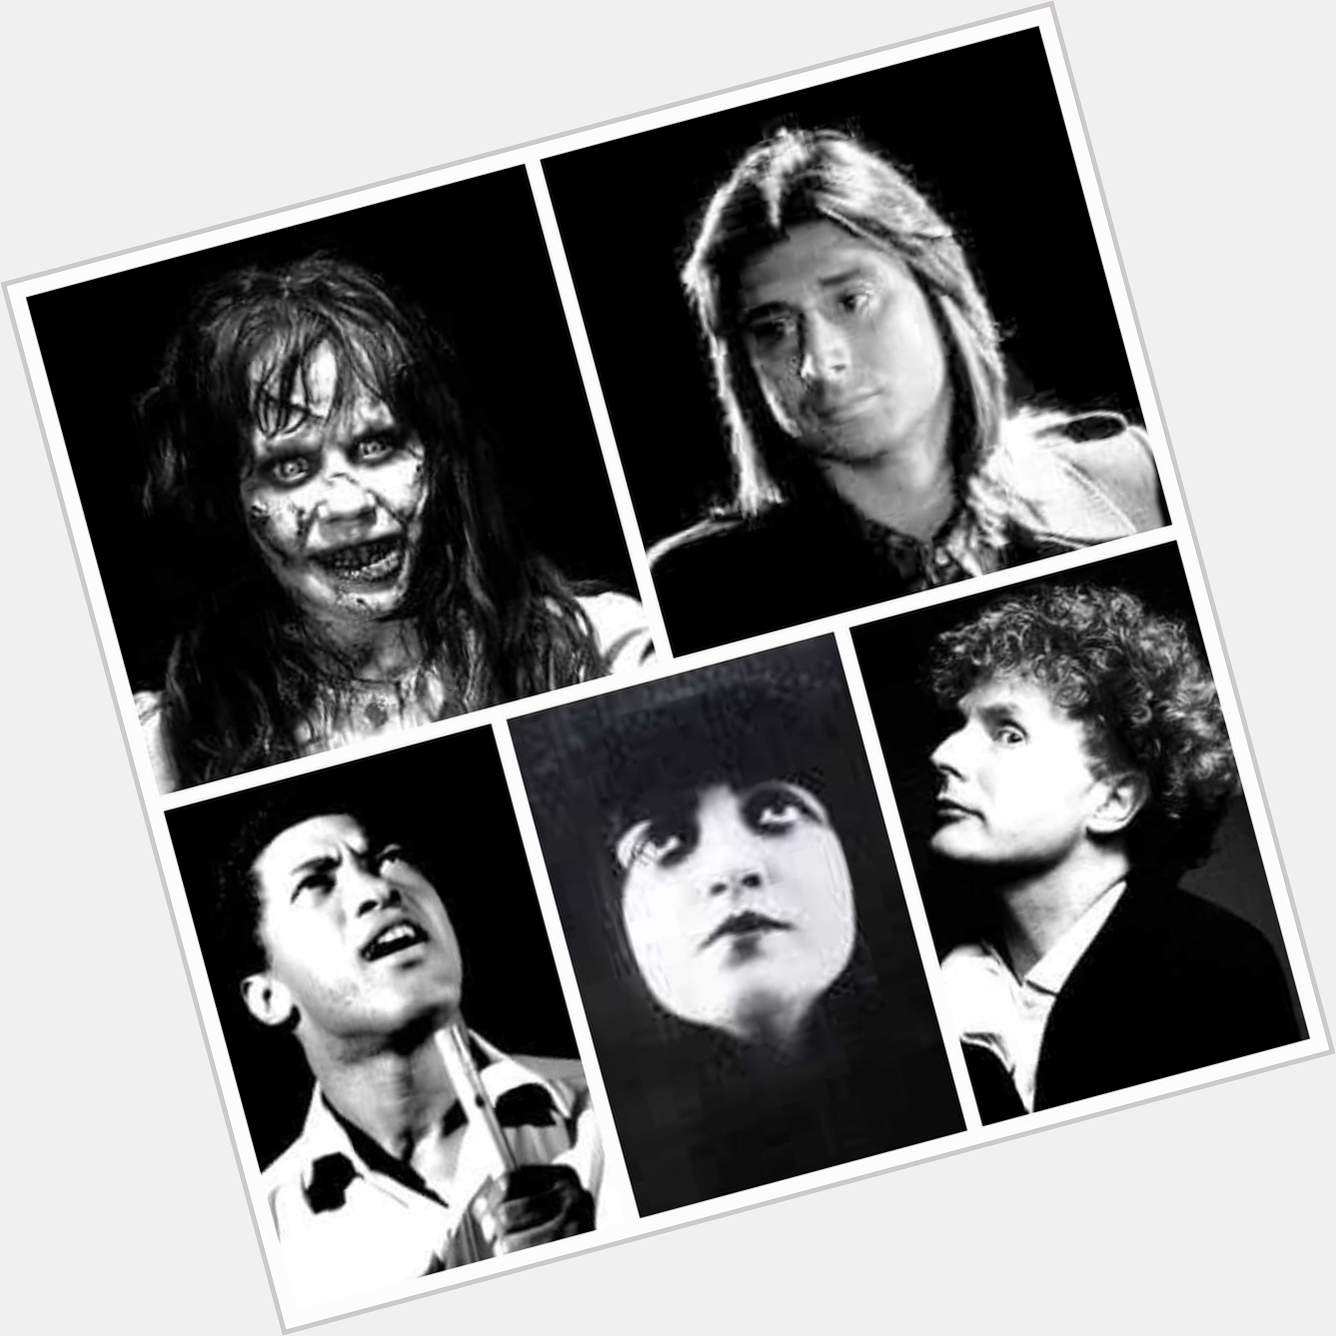 January 22nd 
Happy Birthday to Linda Blair, Steve Perry, Sam Cooke, Rosa Ponselle, and Malcolm McLaren! 